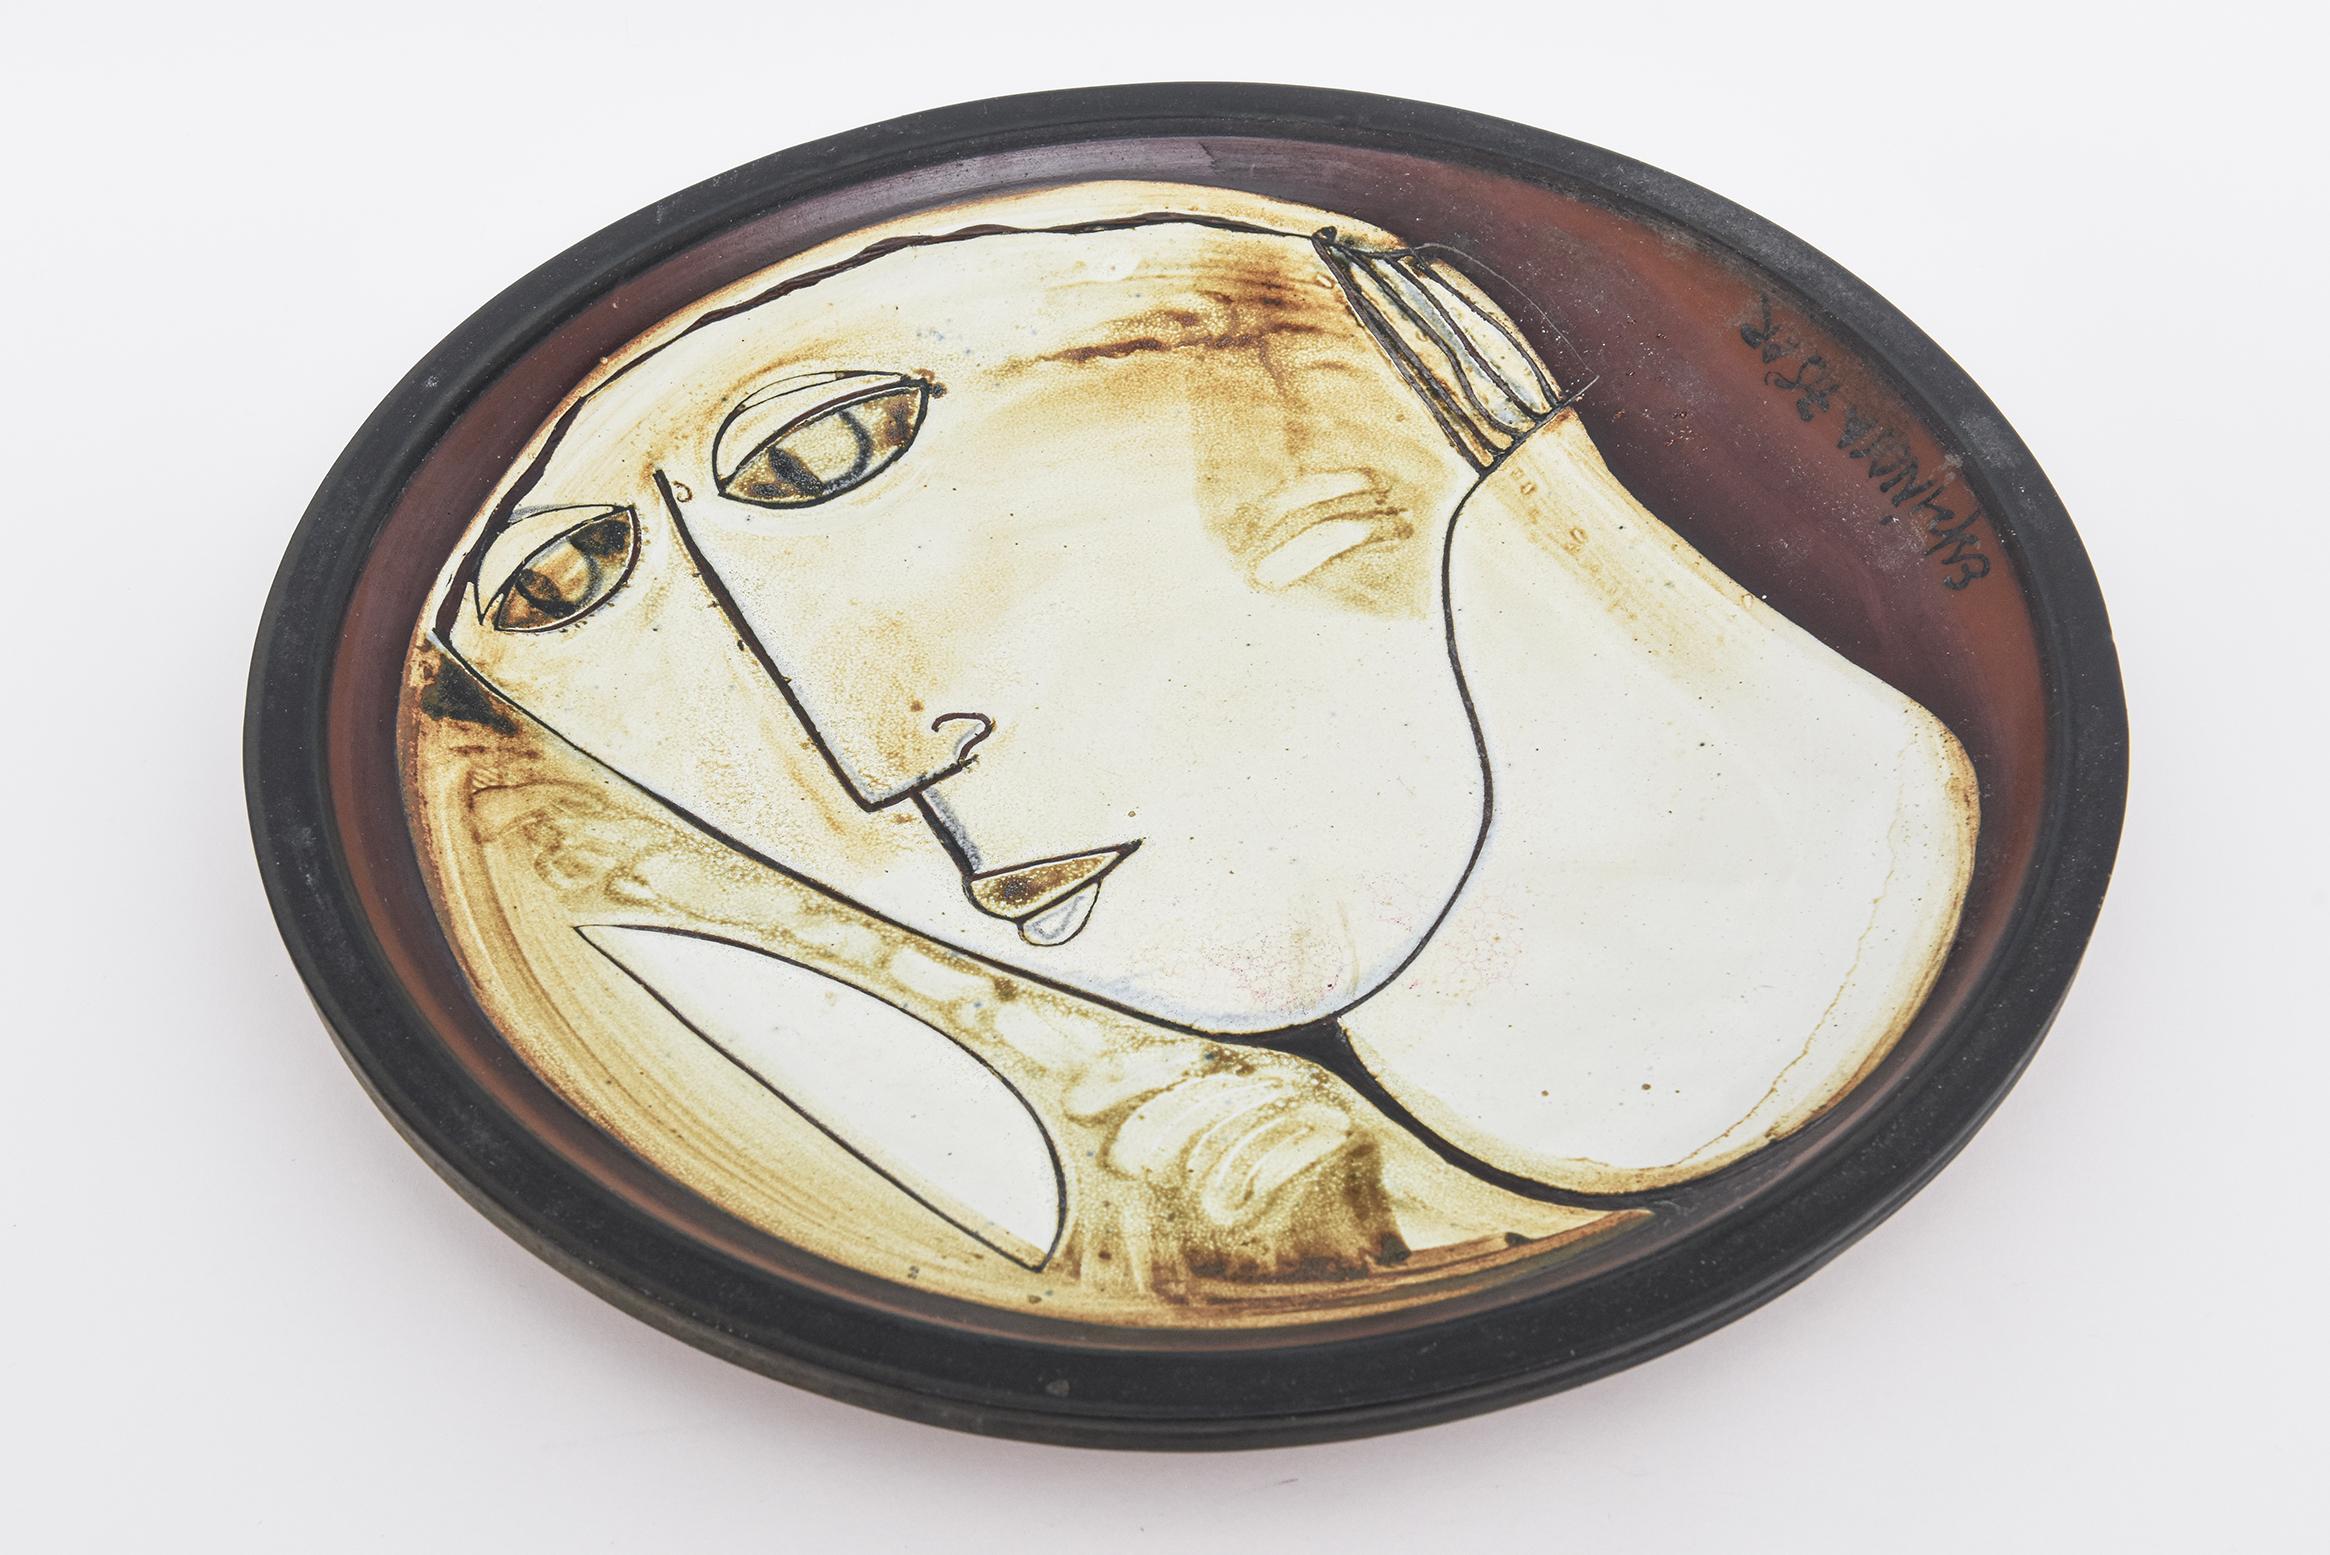 This abstract vintage signed and dated pottery bowl or hanging bowl by Susana Espinosa has a frontal abstract face. She was Argentinian born and migrated to Puerto Rico in the late 60;s. In Argentina she graduated in 1953 from the Academia de Bellas